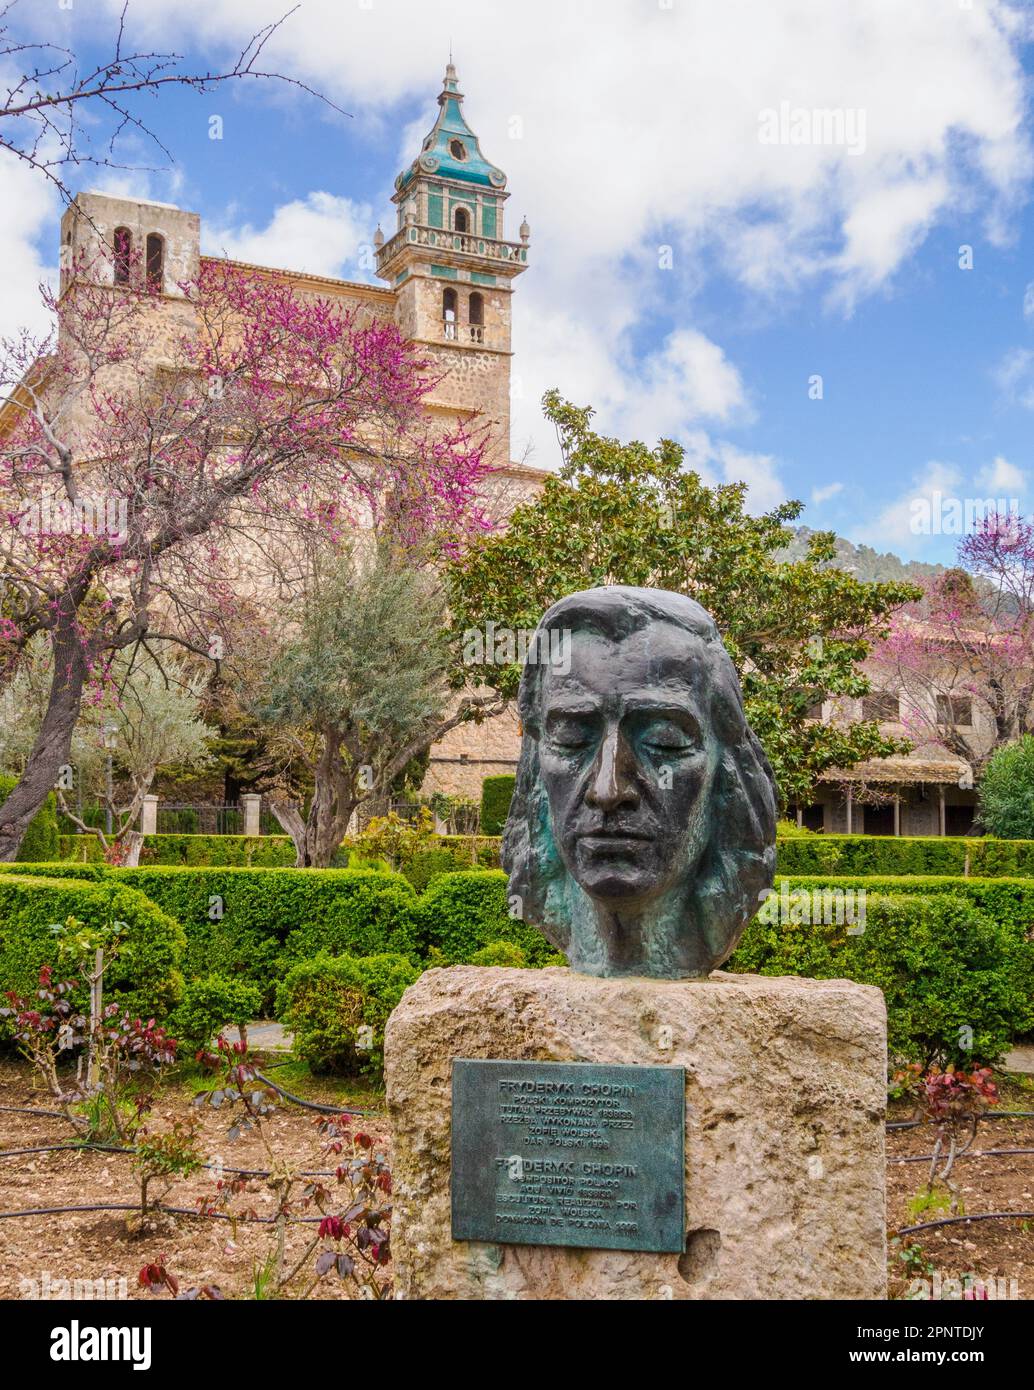 Bronze sculpture of Polish pianist and composer Frederic Chopin by Zofie Wolska in the monastery gardens at Valldemossa Majorca Spain Stock Photo